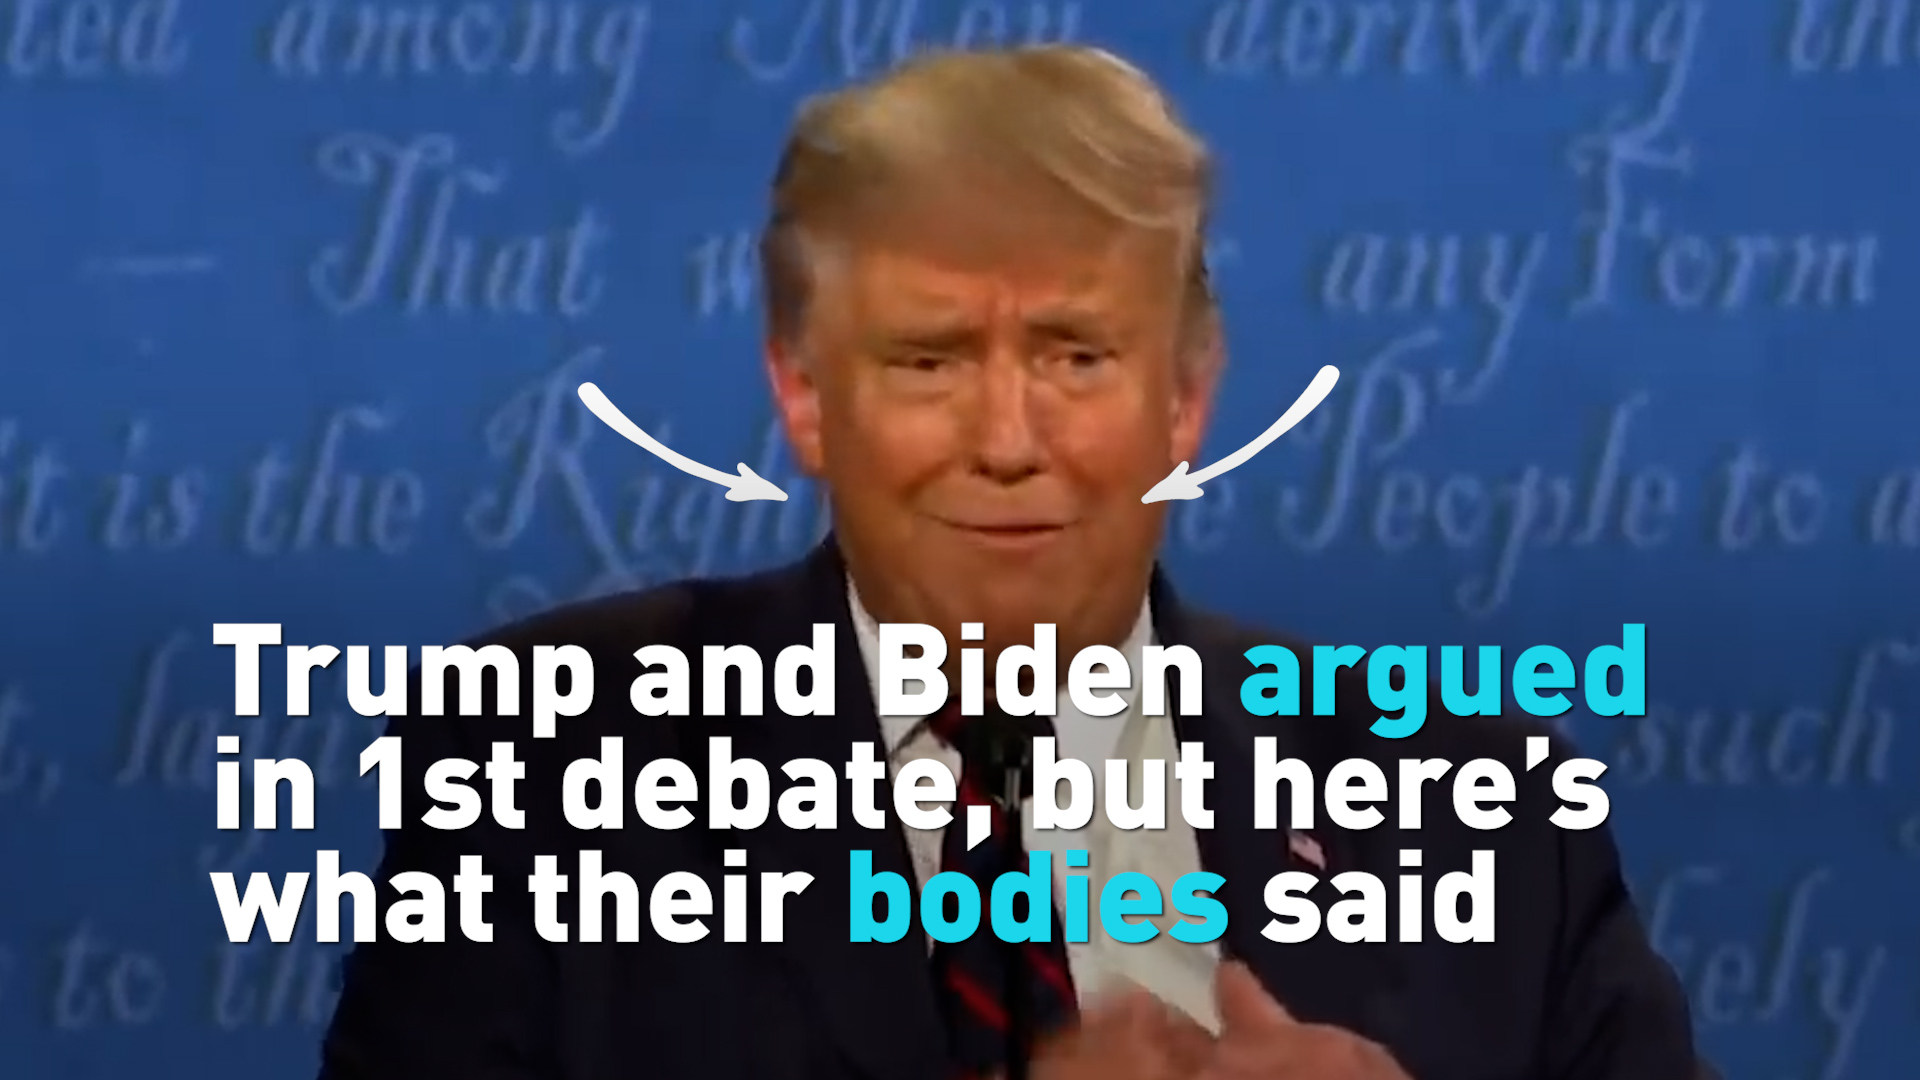 Trump and Biden argued in 1st debate, but here’s what their bodies said